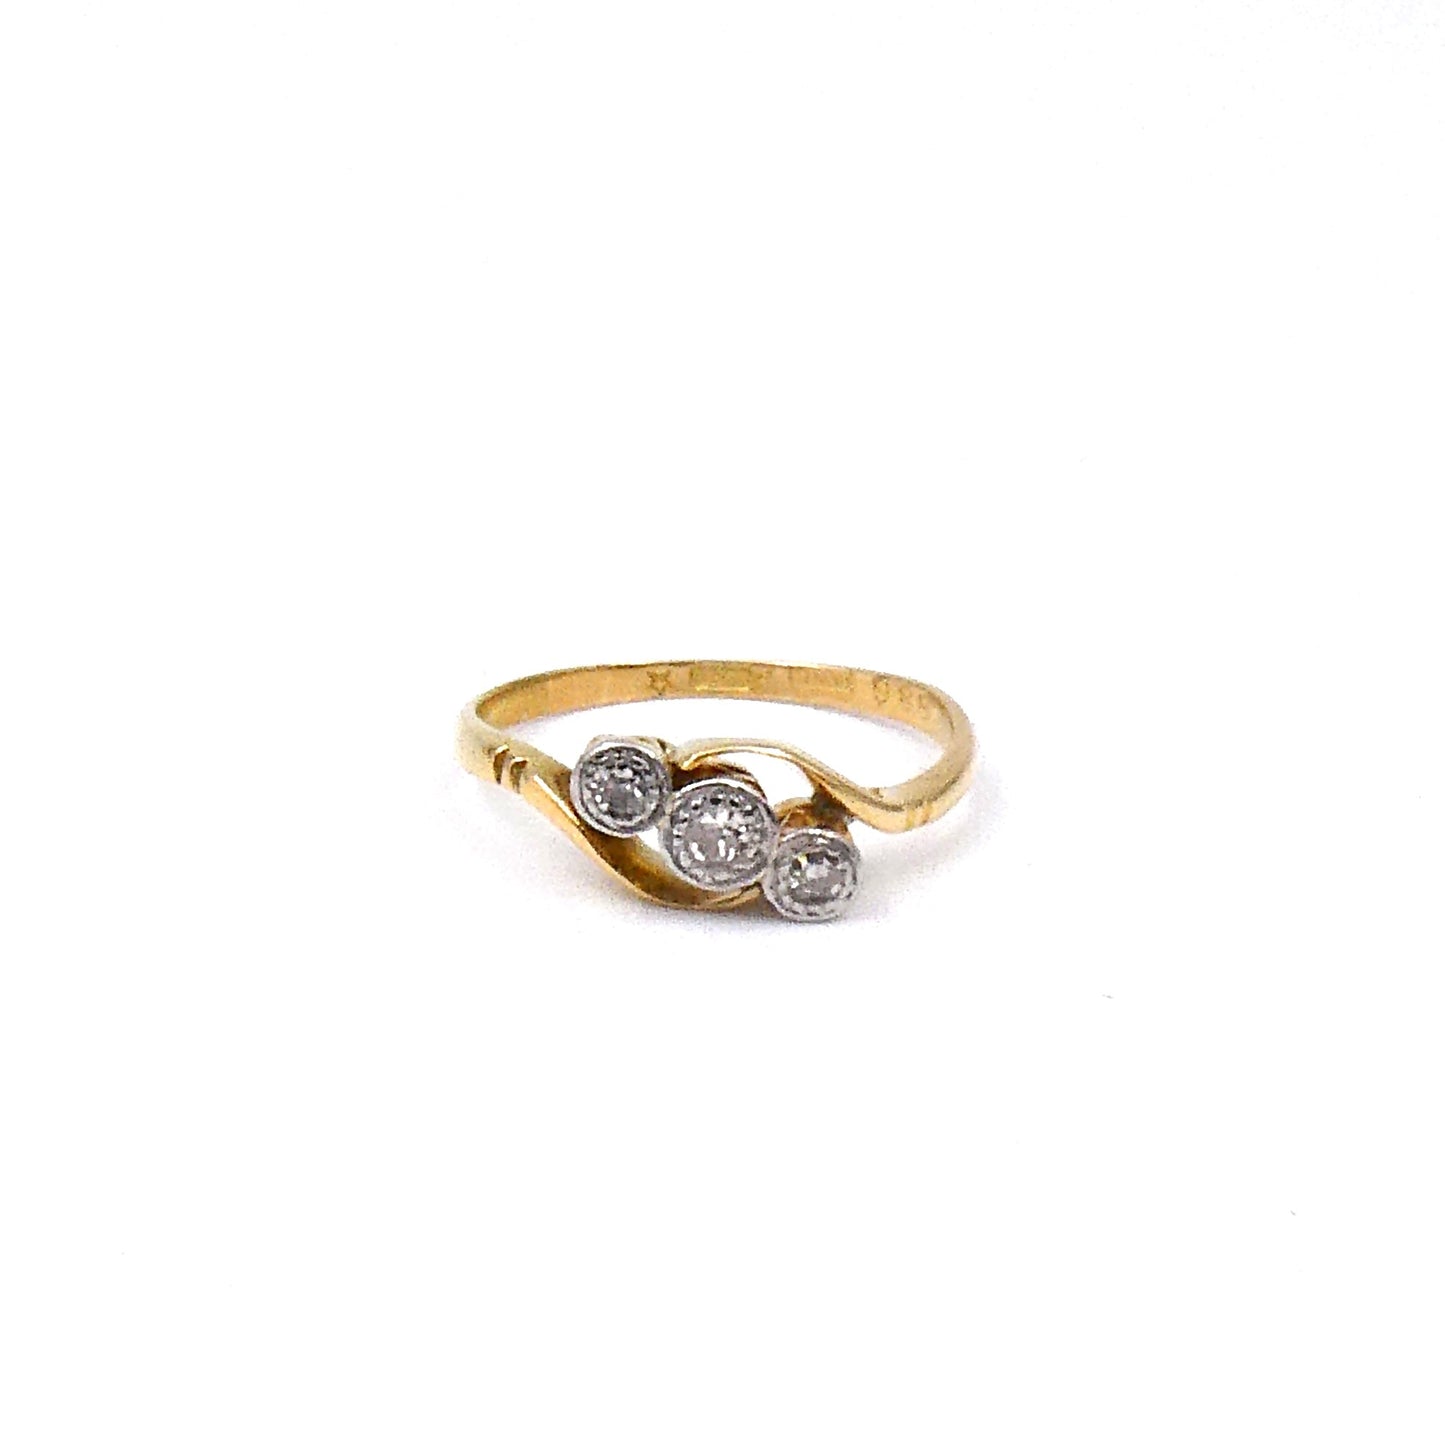 Vintage diamond ring, set with three diamonds in a platinum setting on an 18kt gold curved band. - Collected